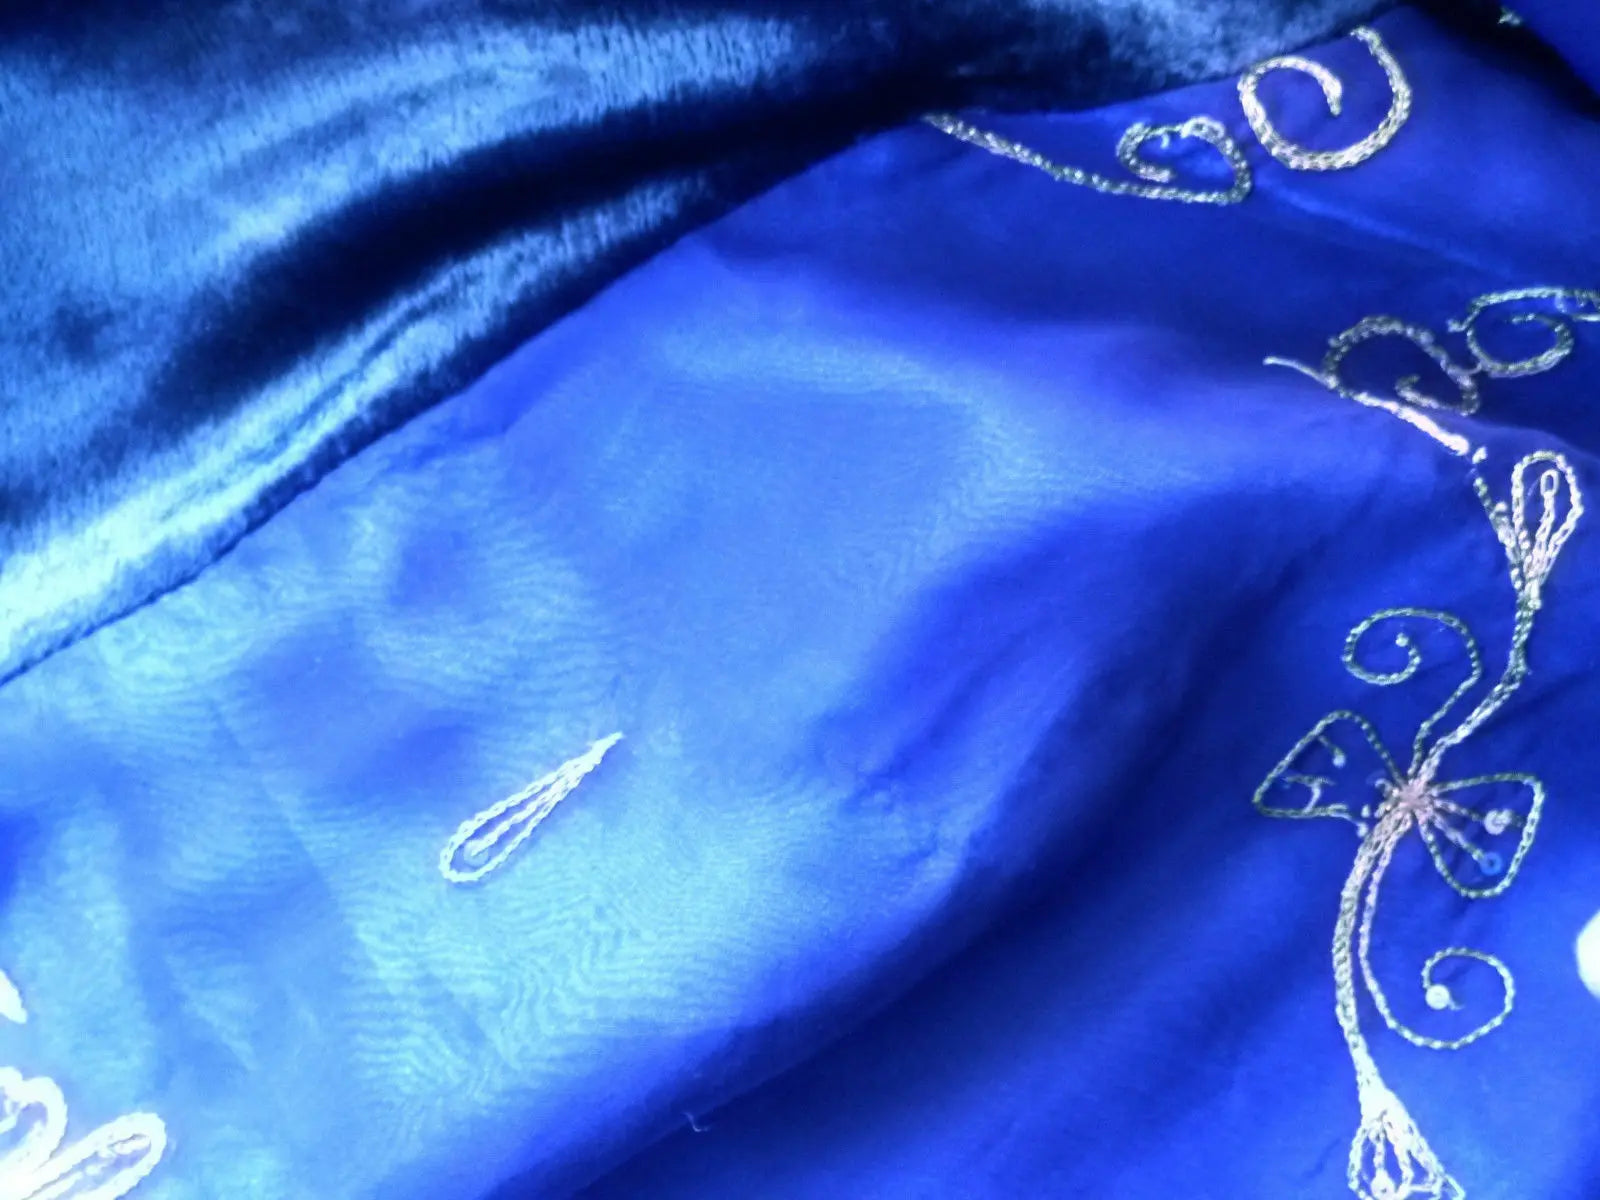 SAPPHIRE BLUE EMBROIDERED PANELLED ‘A’ LINE MAXI INDIAN HIPPY FESTIVAL SKIRT 10 Saree Queen